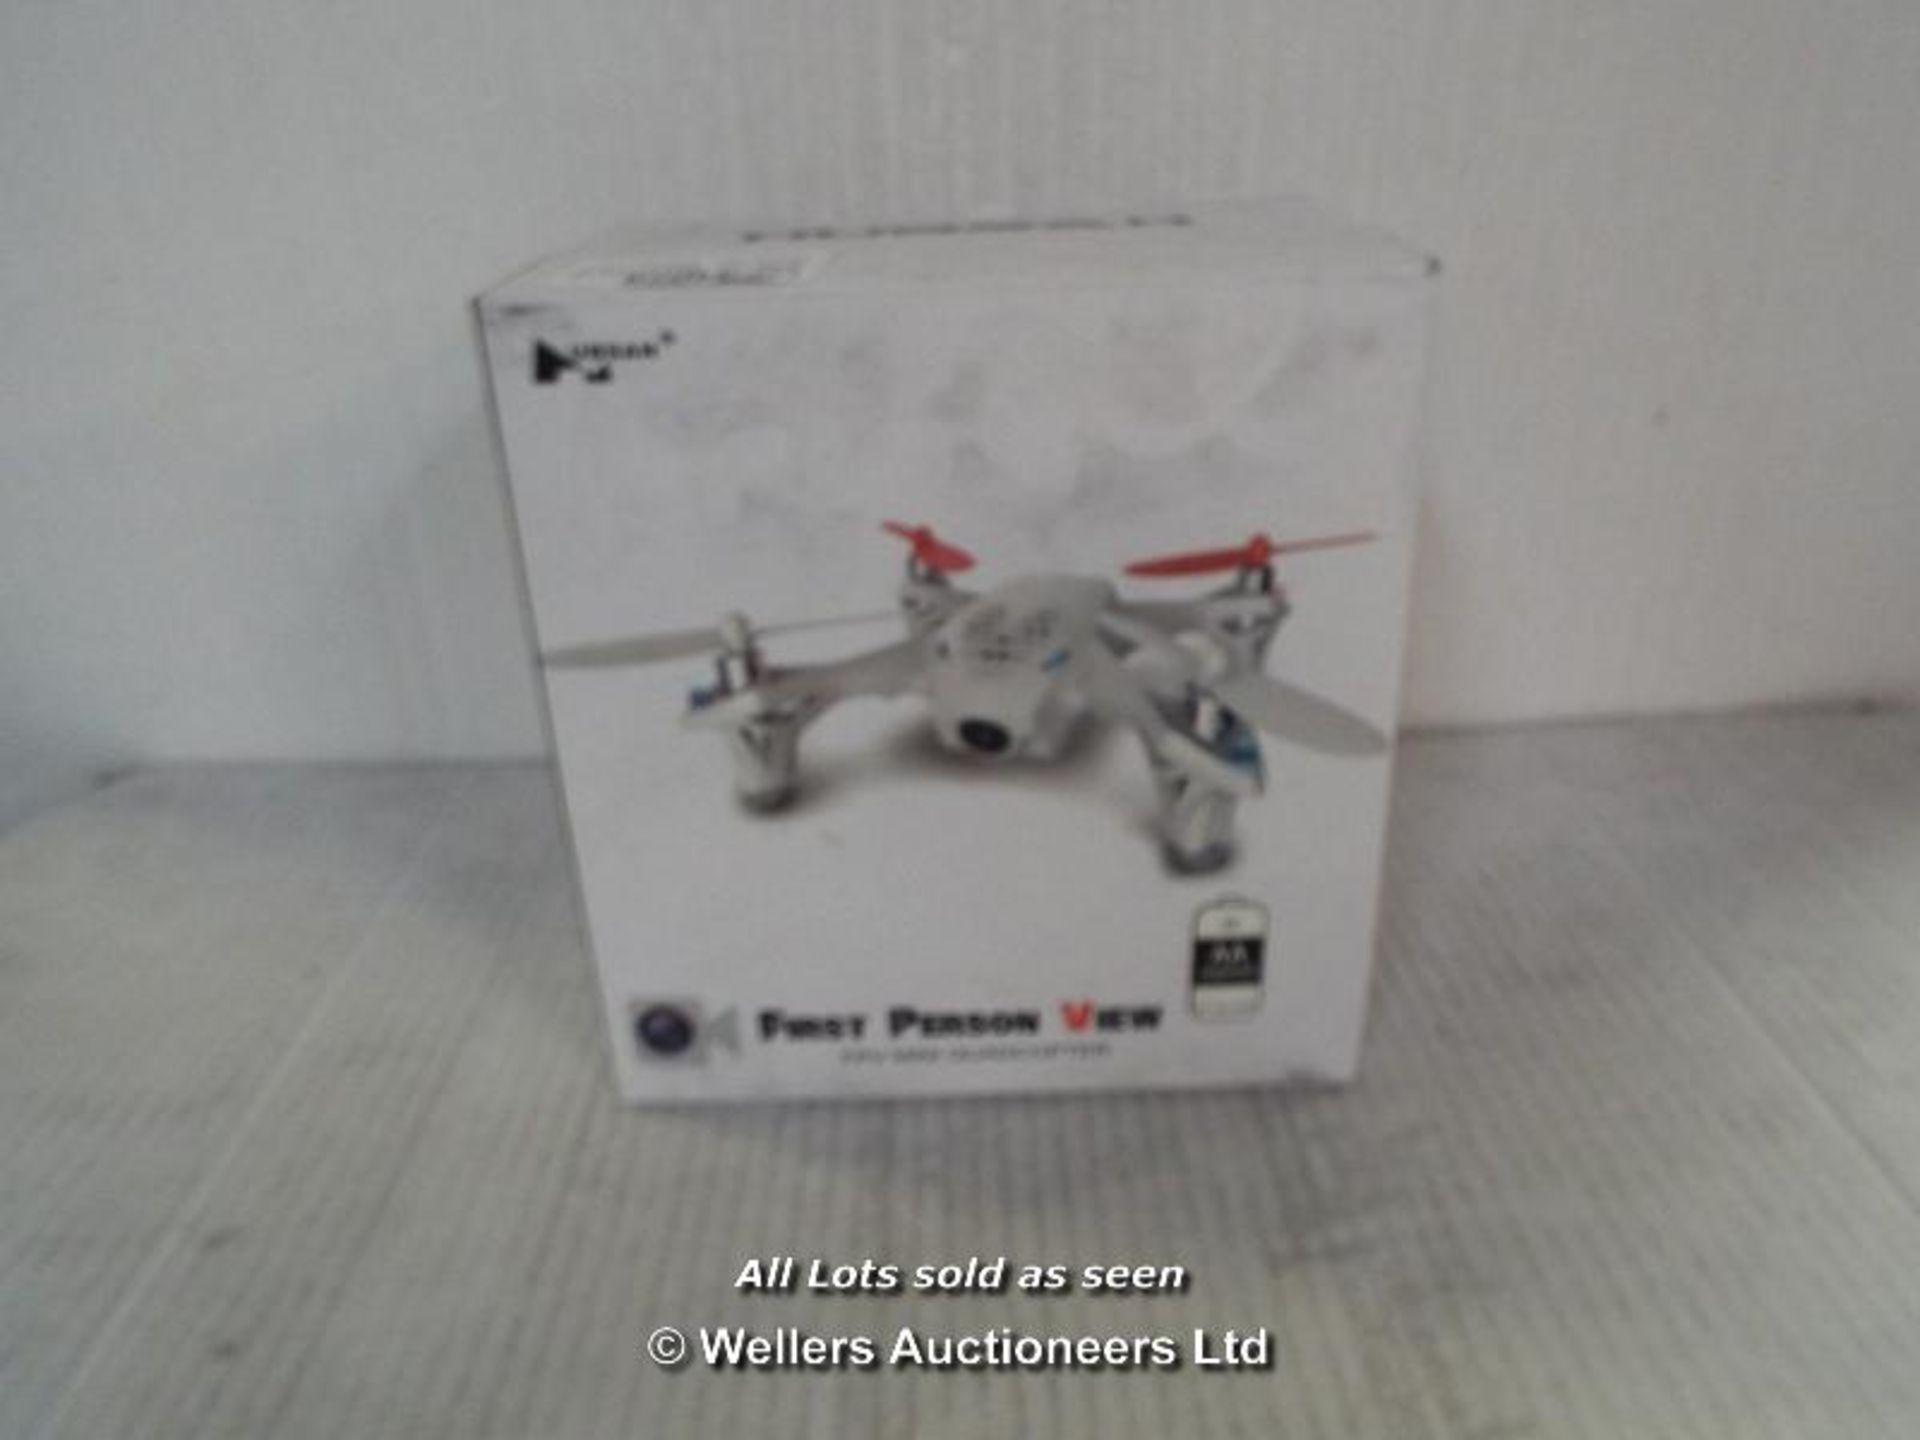 HUBSAN H107D FPV X4 RC QUADCOPTER WITH CAMERA N72DG / GRADE: RETURNS / BOXED (DC2) [AISLE 19] - Image 2 of 2